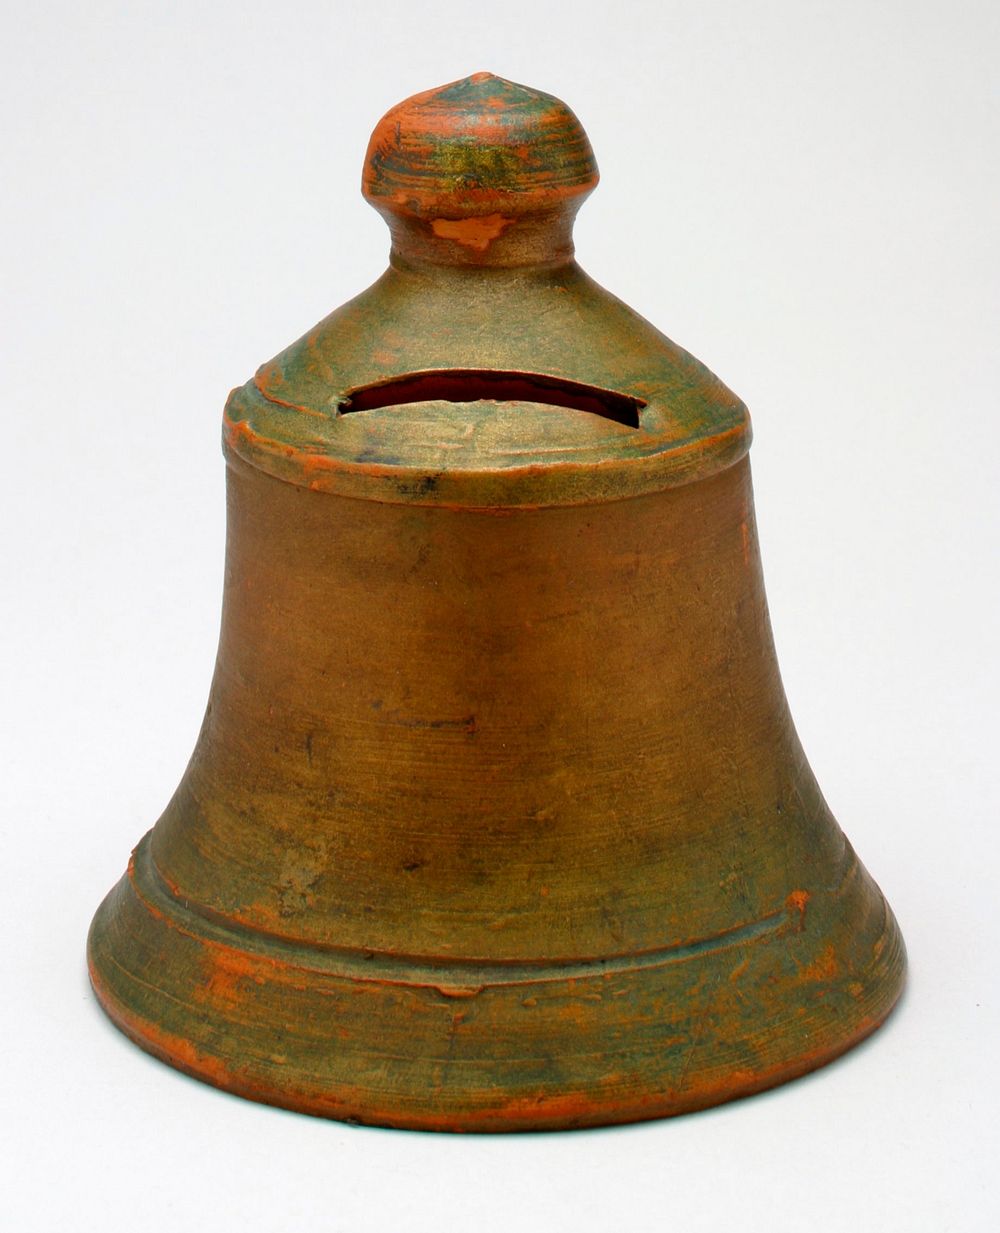 metallic green/gold; red clay shows through especially on top knob. Original from the Minneapolis Institute of Art.